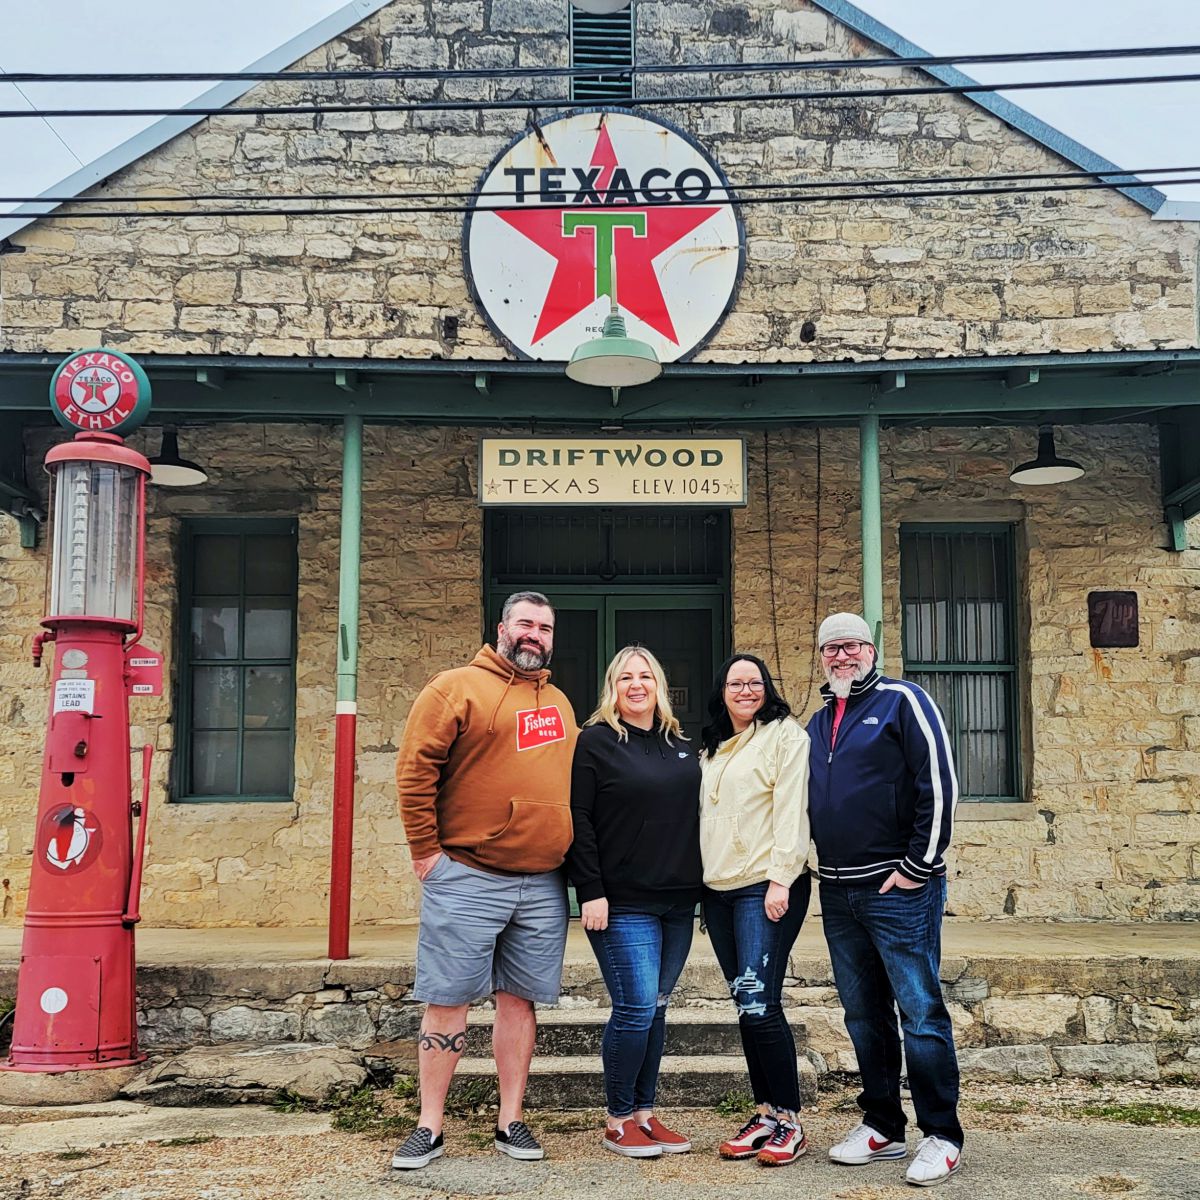 4 people standing in front of Texas country store